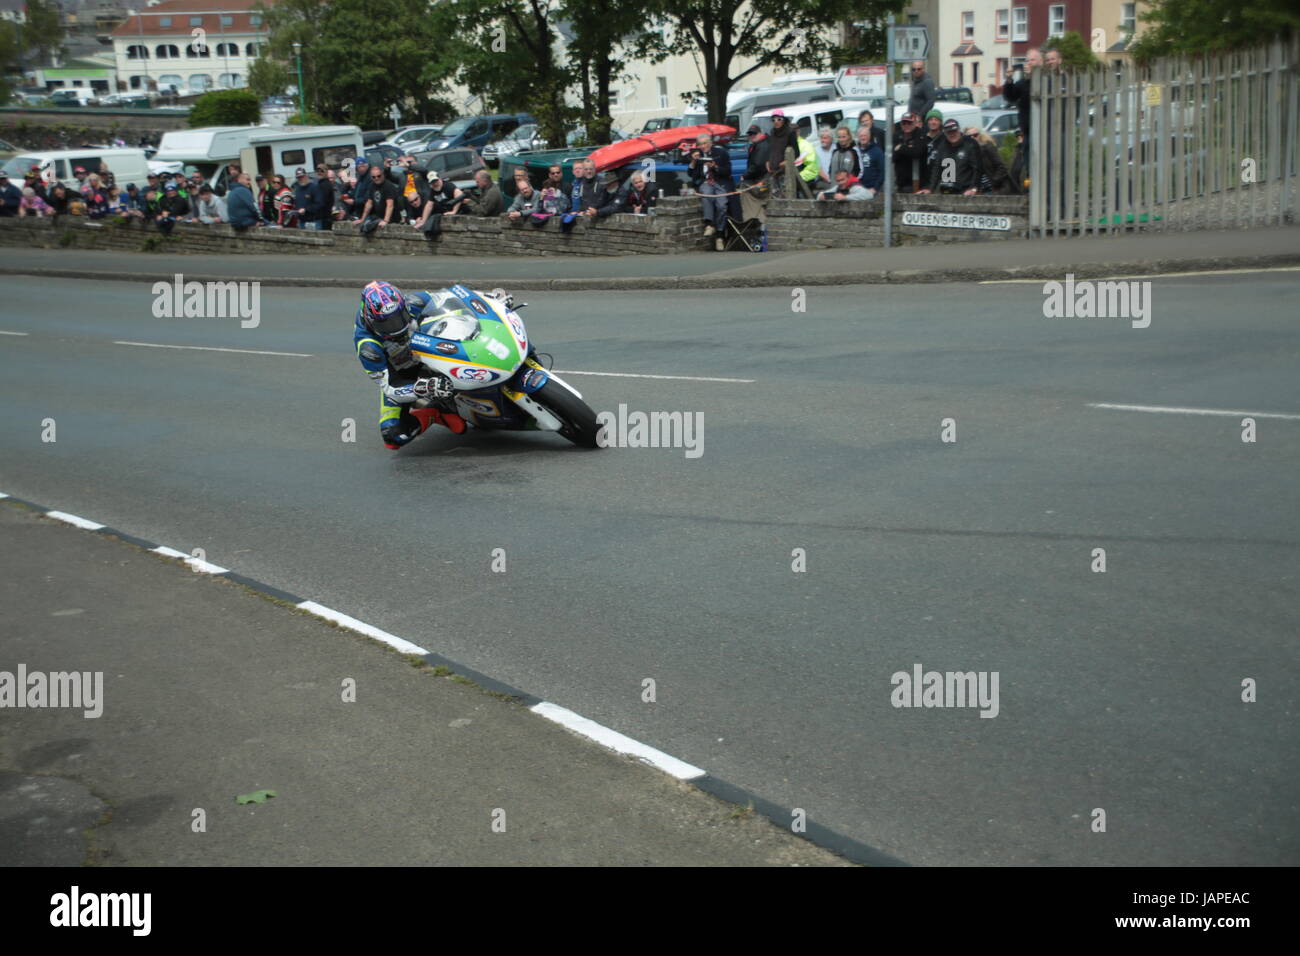 Isle Of Man, UK. 7th June, 2017. Ramsey, Isle of Man, UK. 7th Jun, 2017. Isle of Man TT Races, Day 3, Bennetts Lightweight Race. Number 5 Daniel Cooper on his lightweight Kawasaki (KW Electrical Services by DCM). Credit: Louisa Jane Bawden/Alamy Live News. Stock Photo